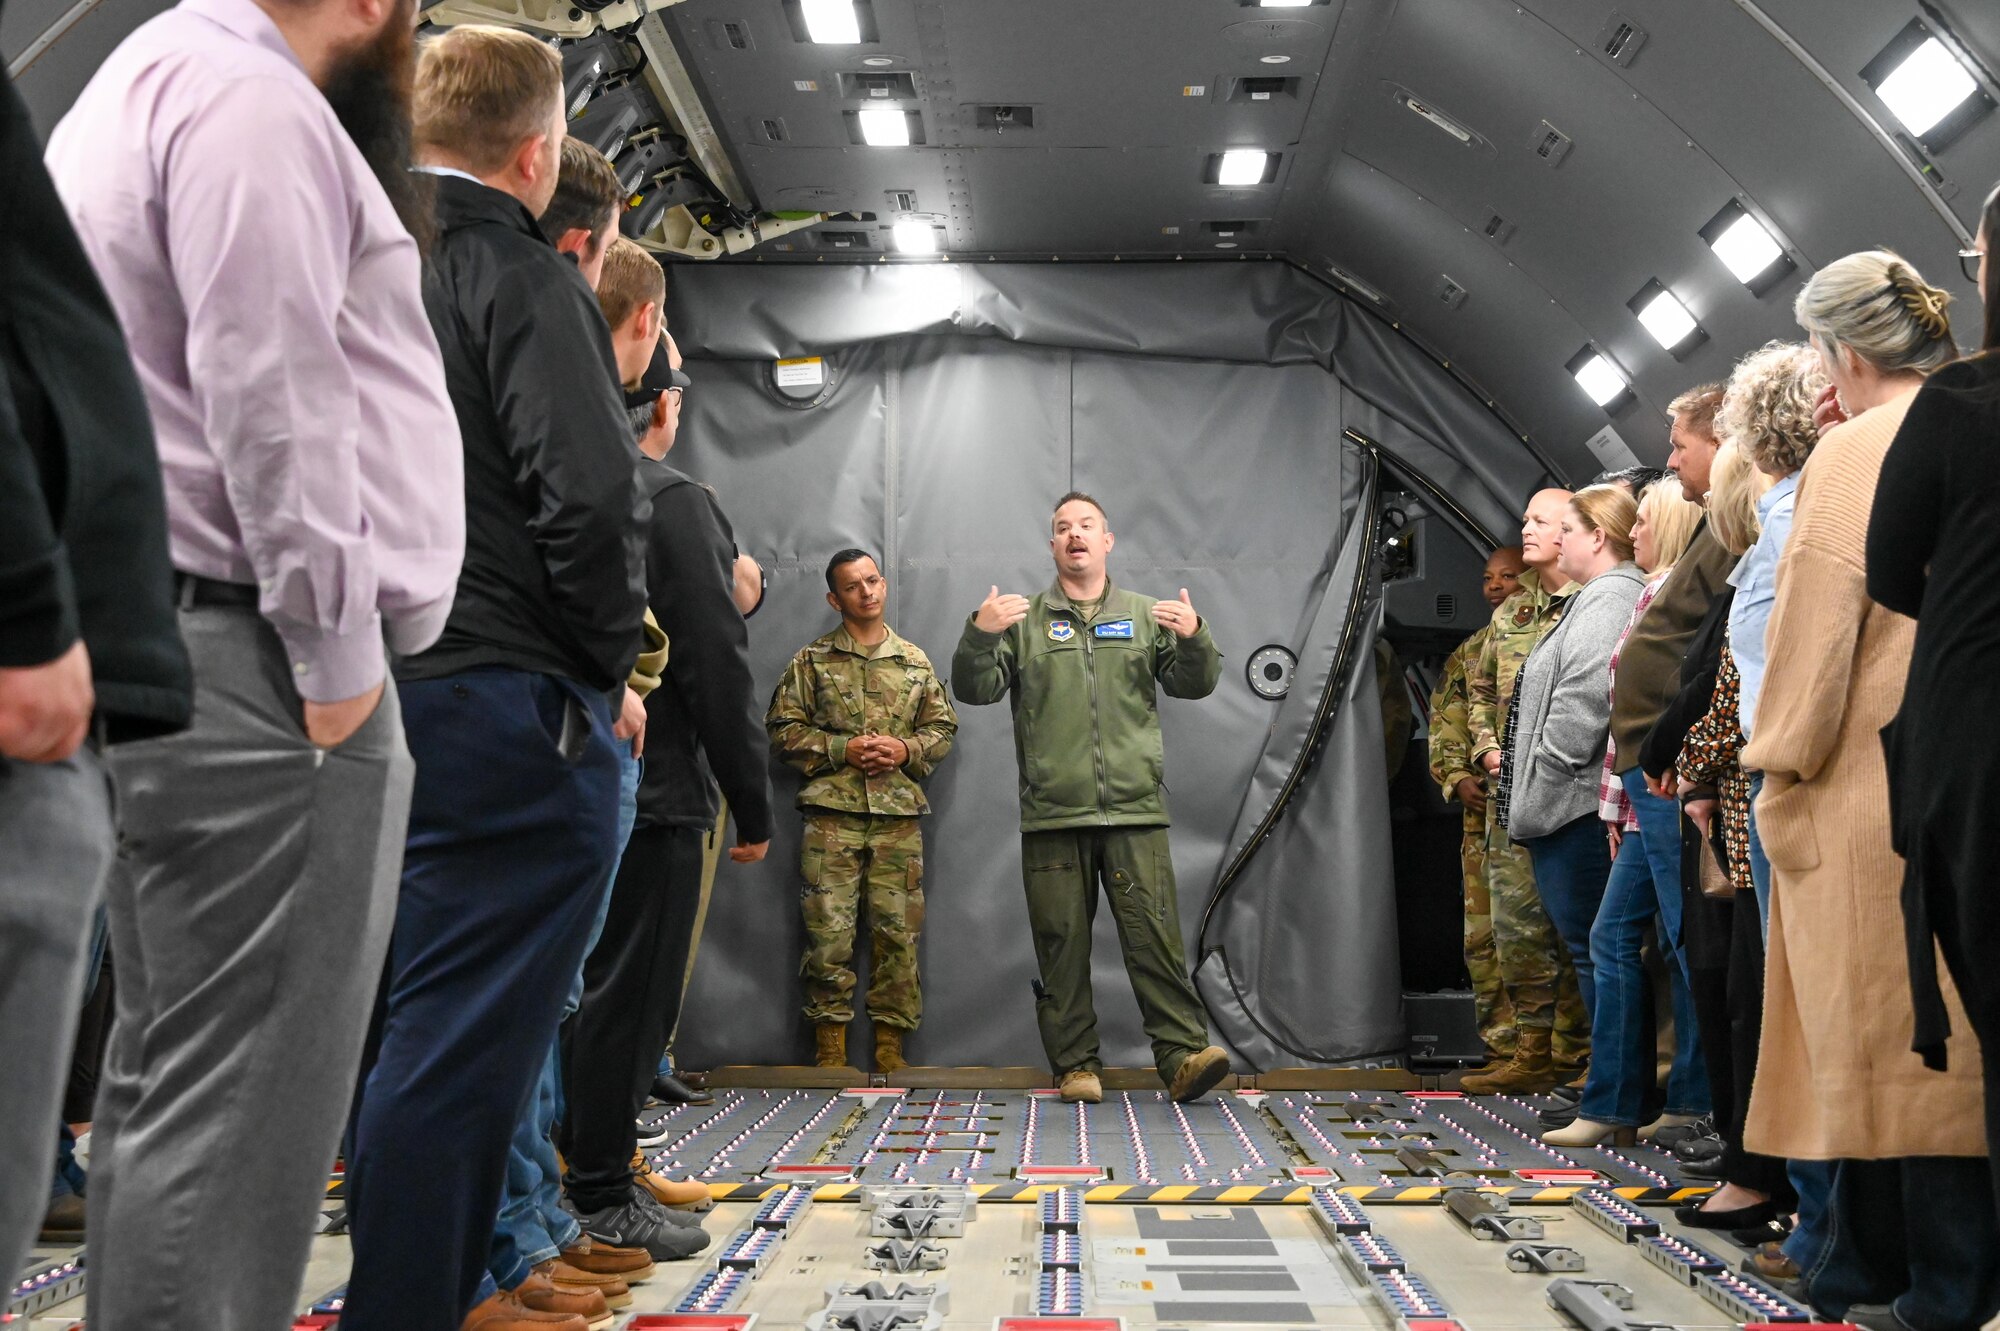 U.S. Air Force Maj. Gary Sowa, 56th Air Refueling Squadron instructor pilot, talks to community members while on a KC-46 Pegasus at Altus Air Force Base, Oklahoma, Oct. 18, 2022. Sowa provided information about the KC-46 cargo capabilities. (U.S. Air Force photo by Senior Airman Trenton Jancze)